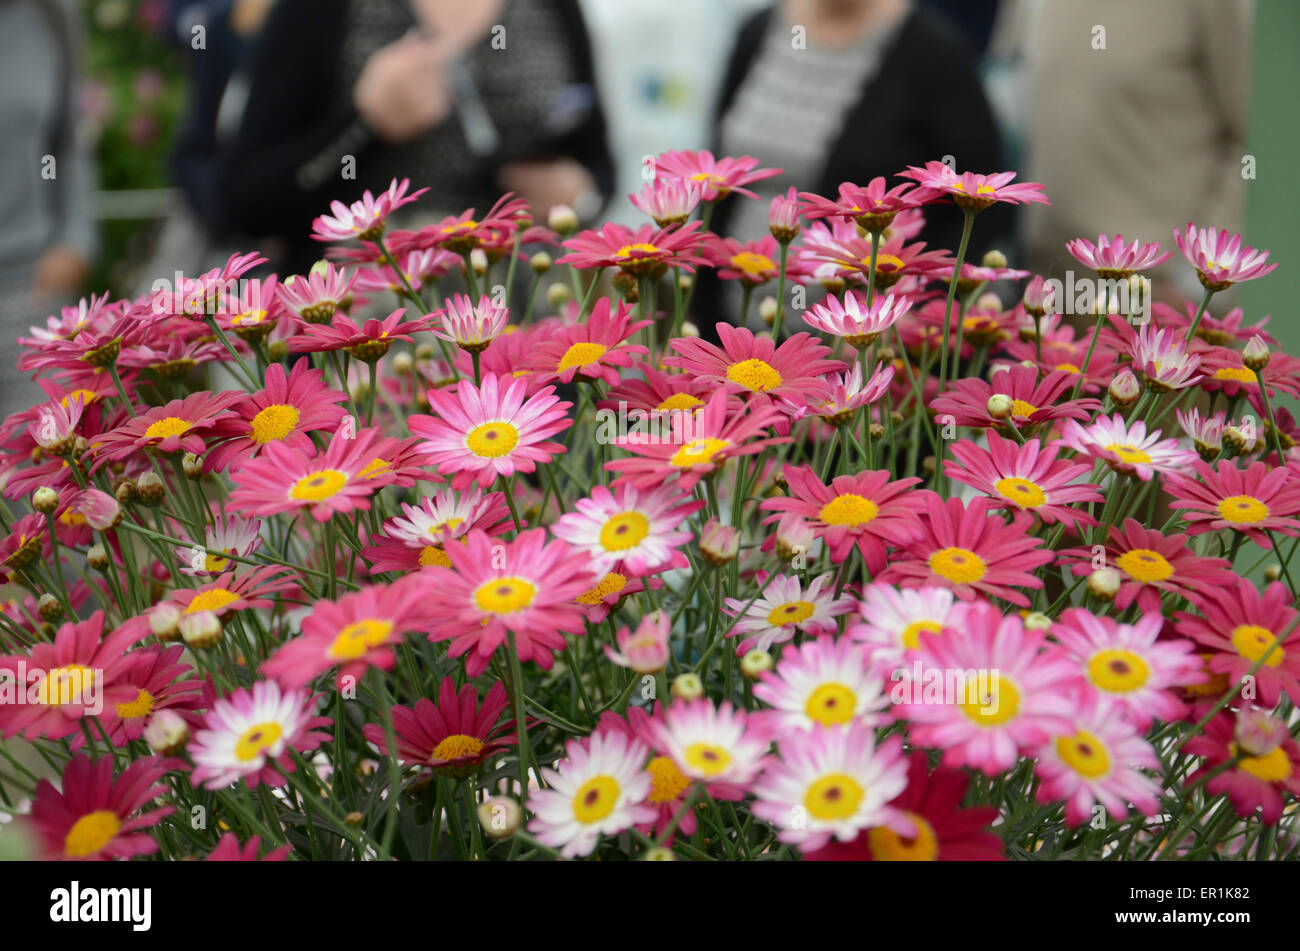 Deep red/pink & white daisies, part of the Gold medal winning Marks & Spencer floral display in the 'Great Pavilion', RHS CFS Stock Photo